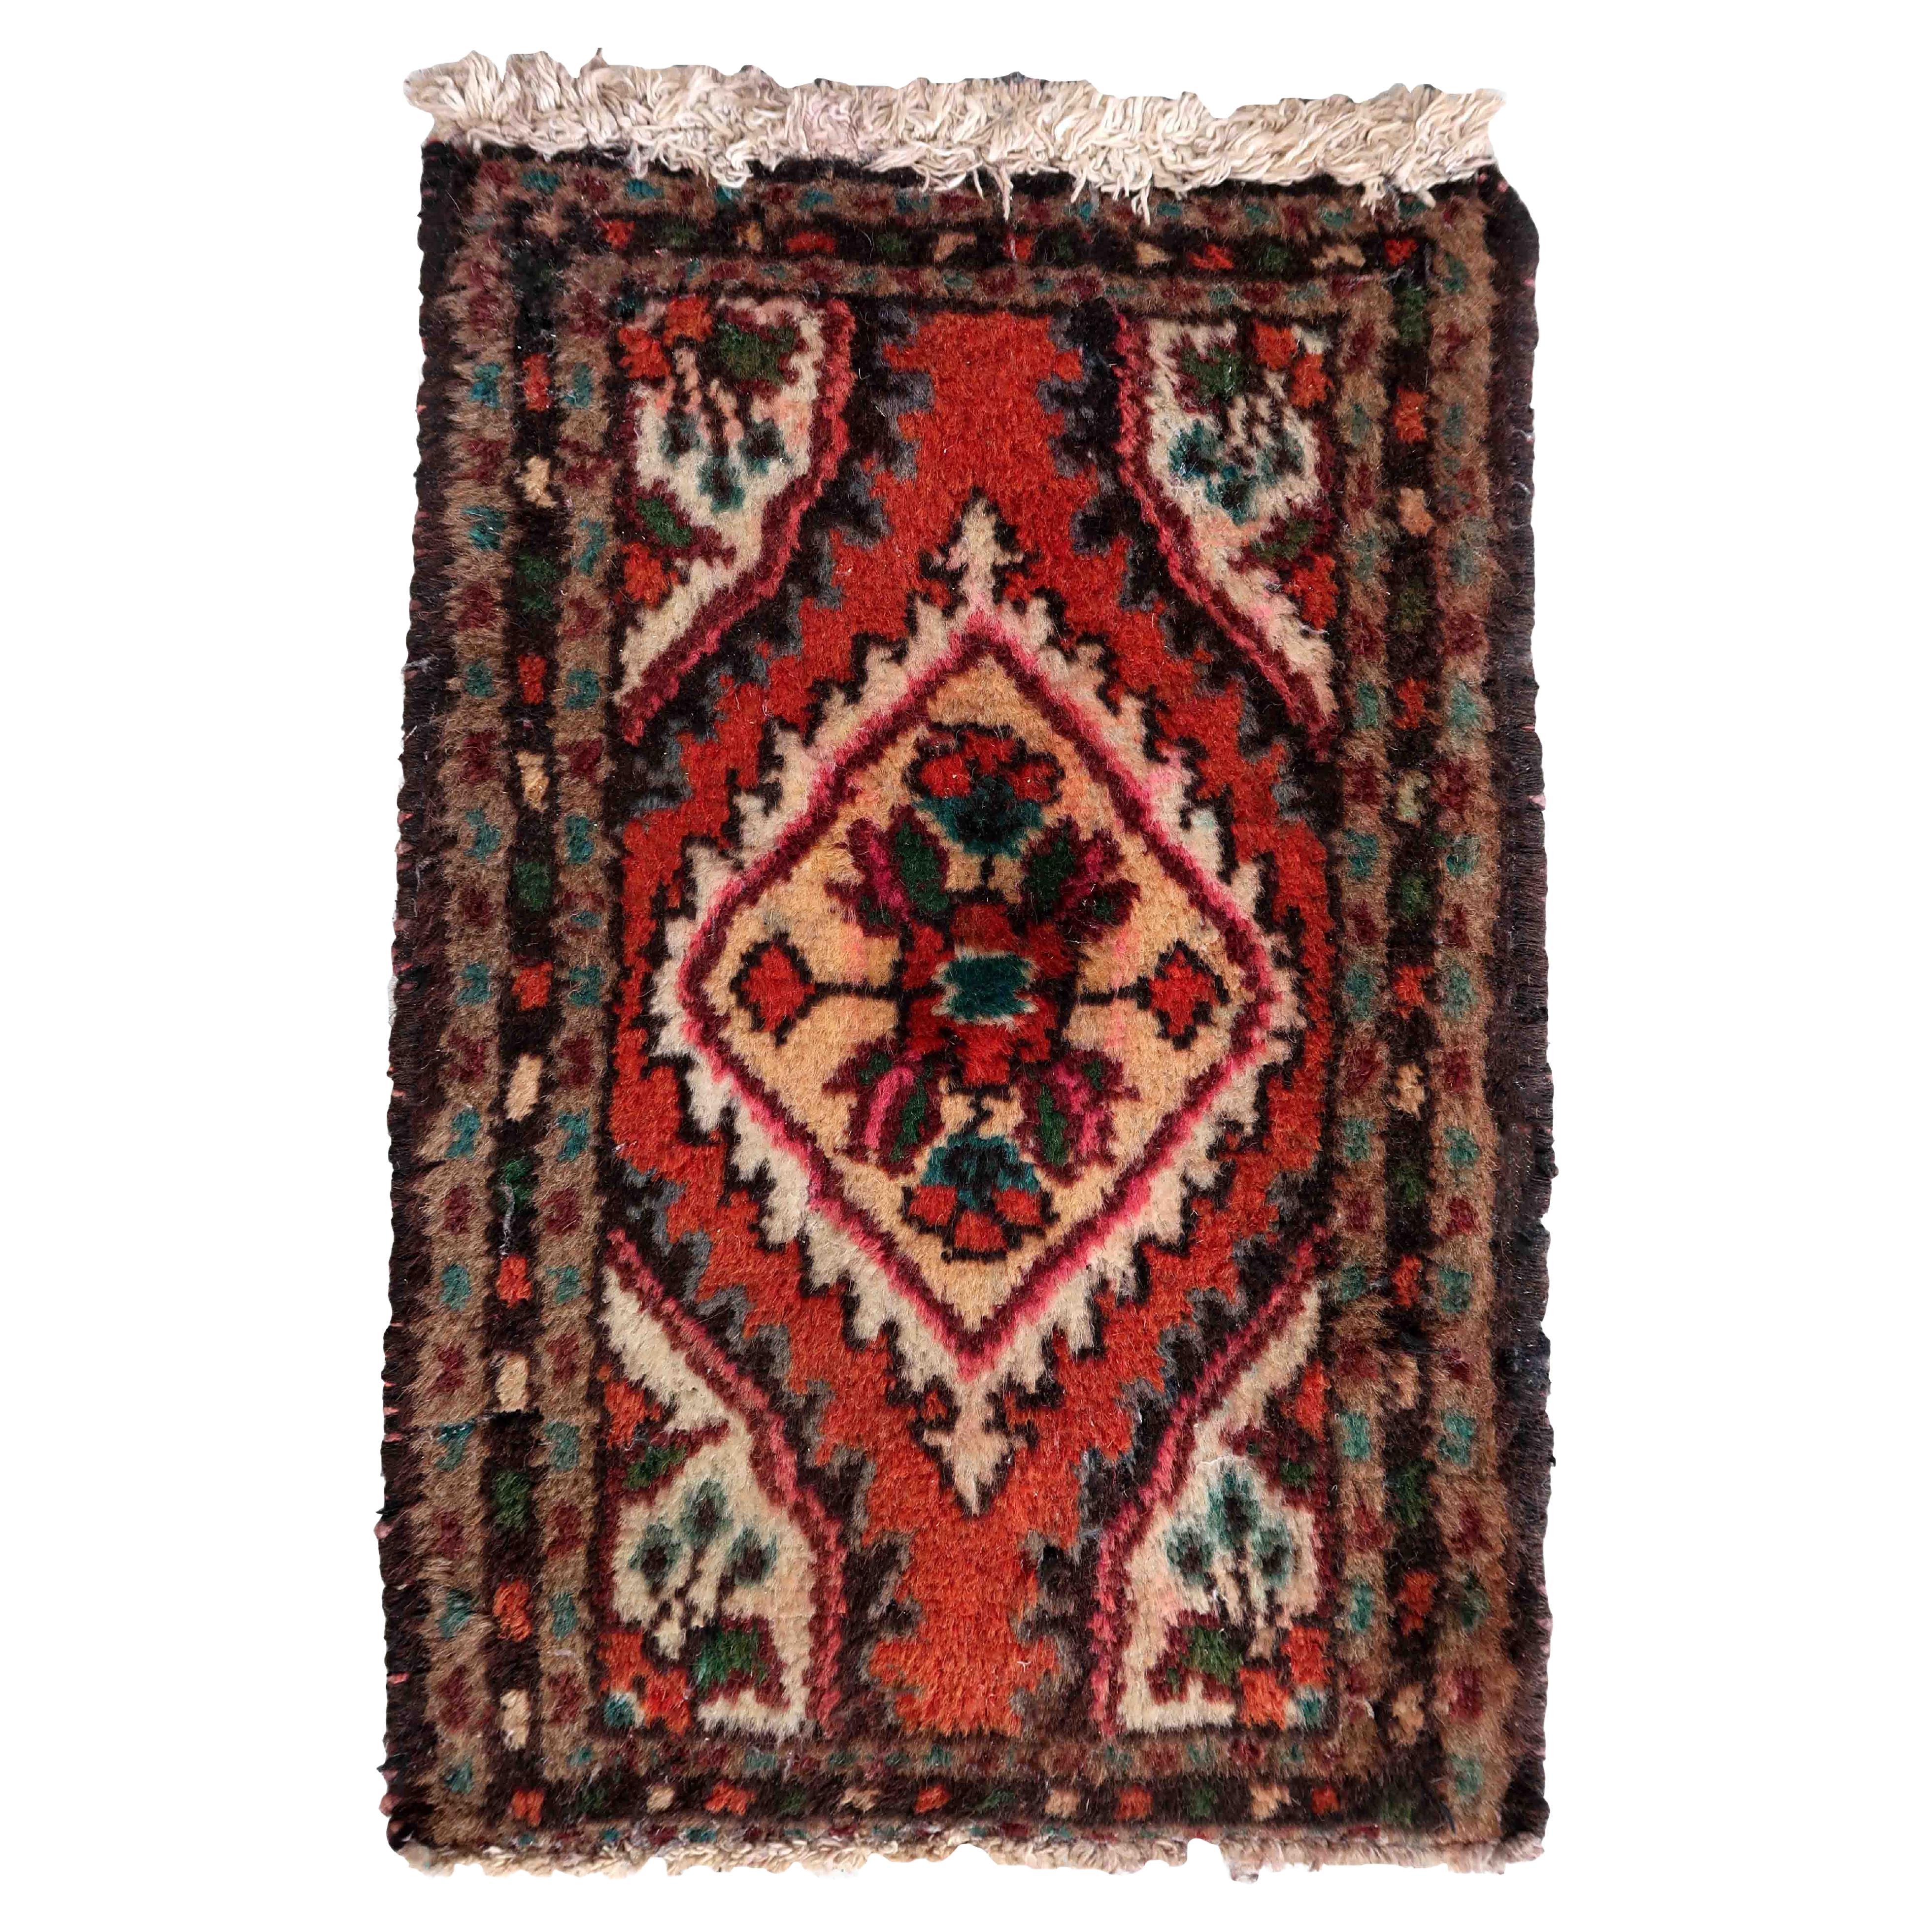 Rugs and Carpets at Auction